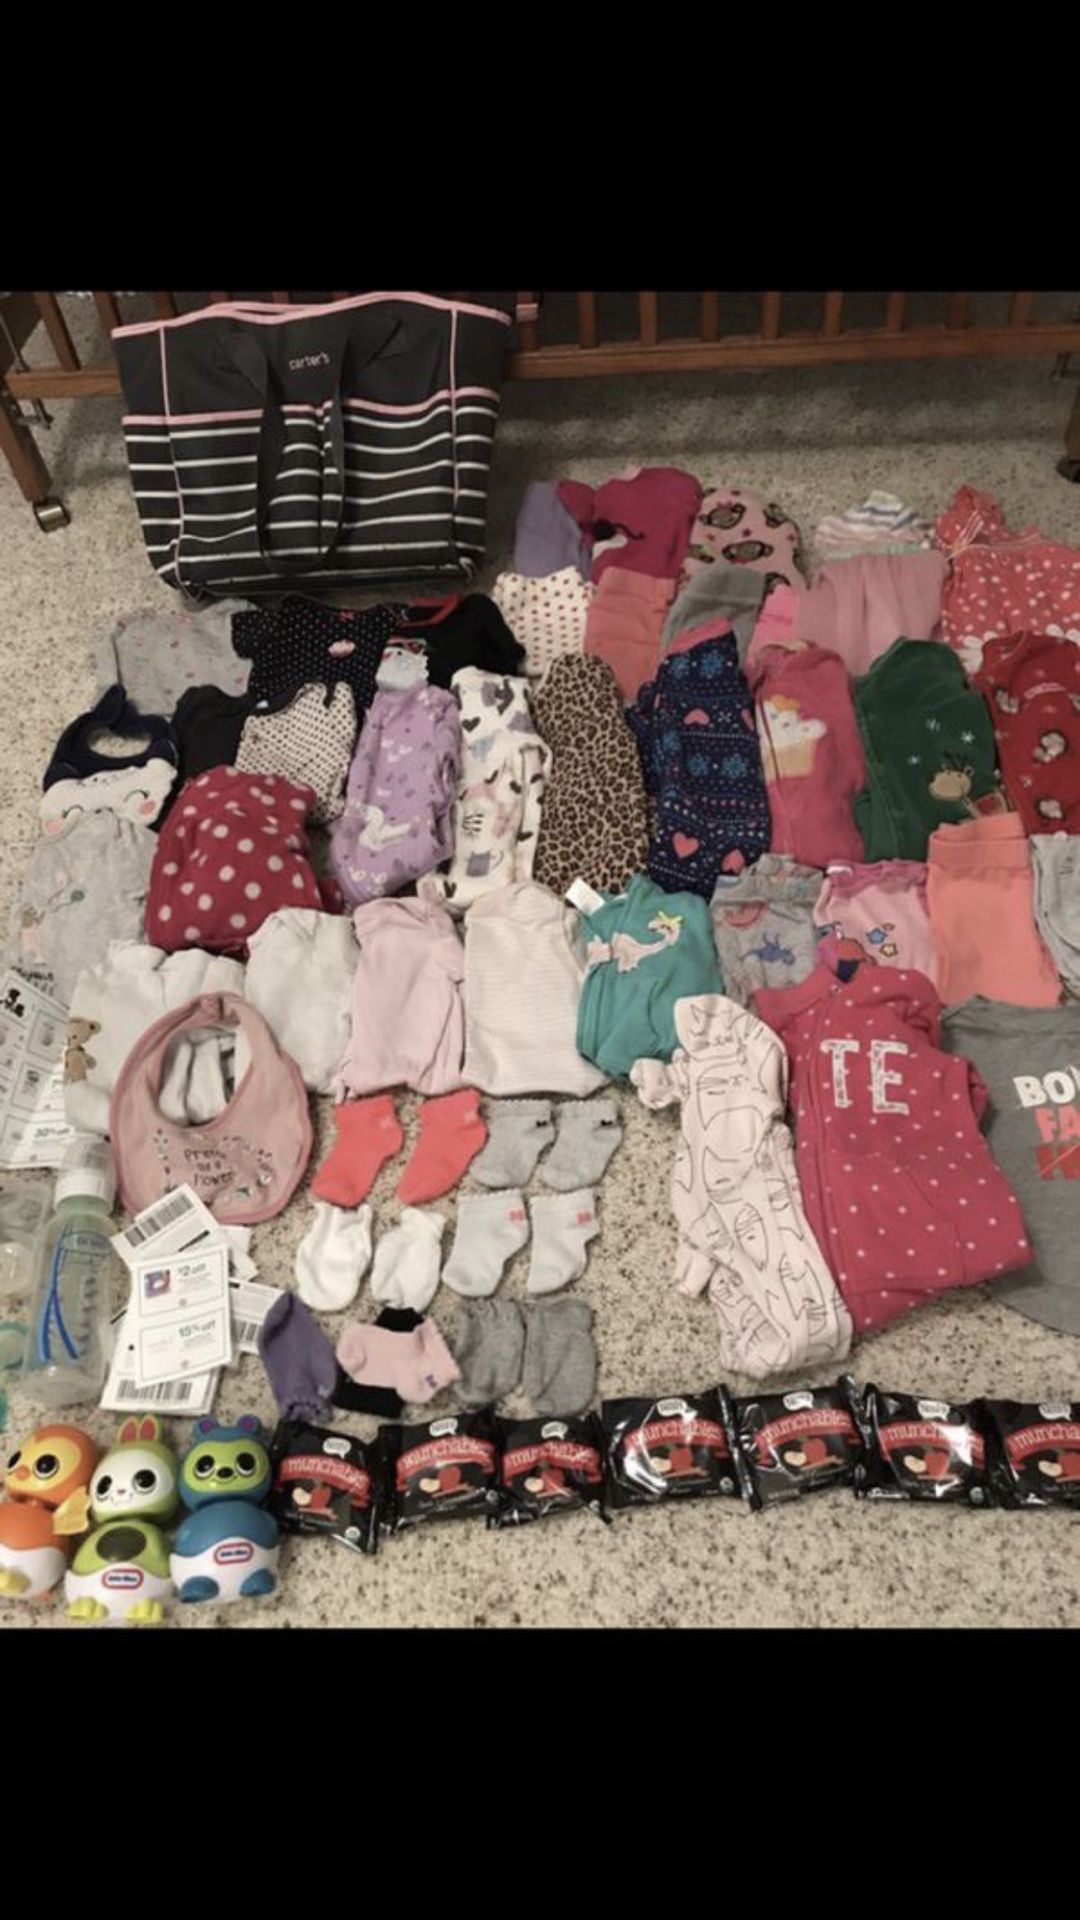 Carter’s 9-18month lot 9 sleepers 2 bibs 15 pants 2 jackets 11 onesies 5 shirts 1 sweat shirt (juicy couture) with matching pants 3 socks 2 mit